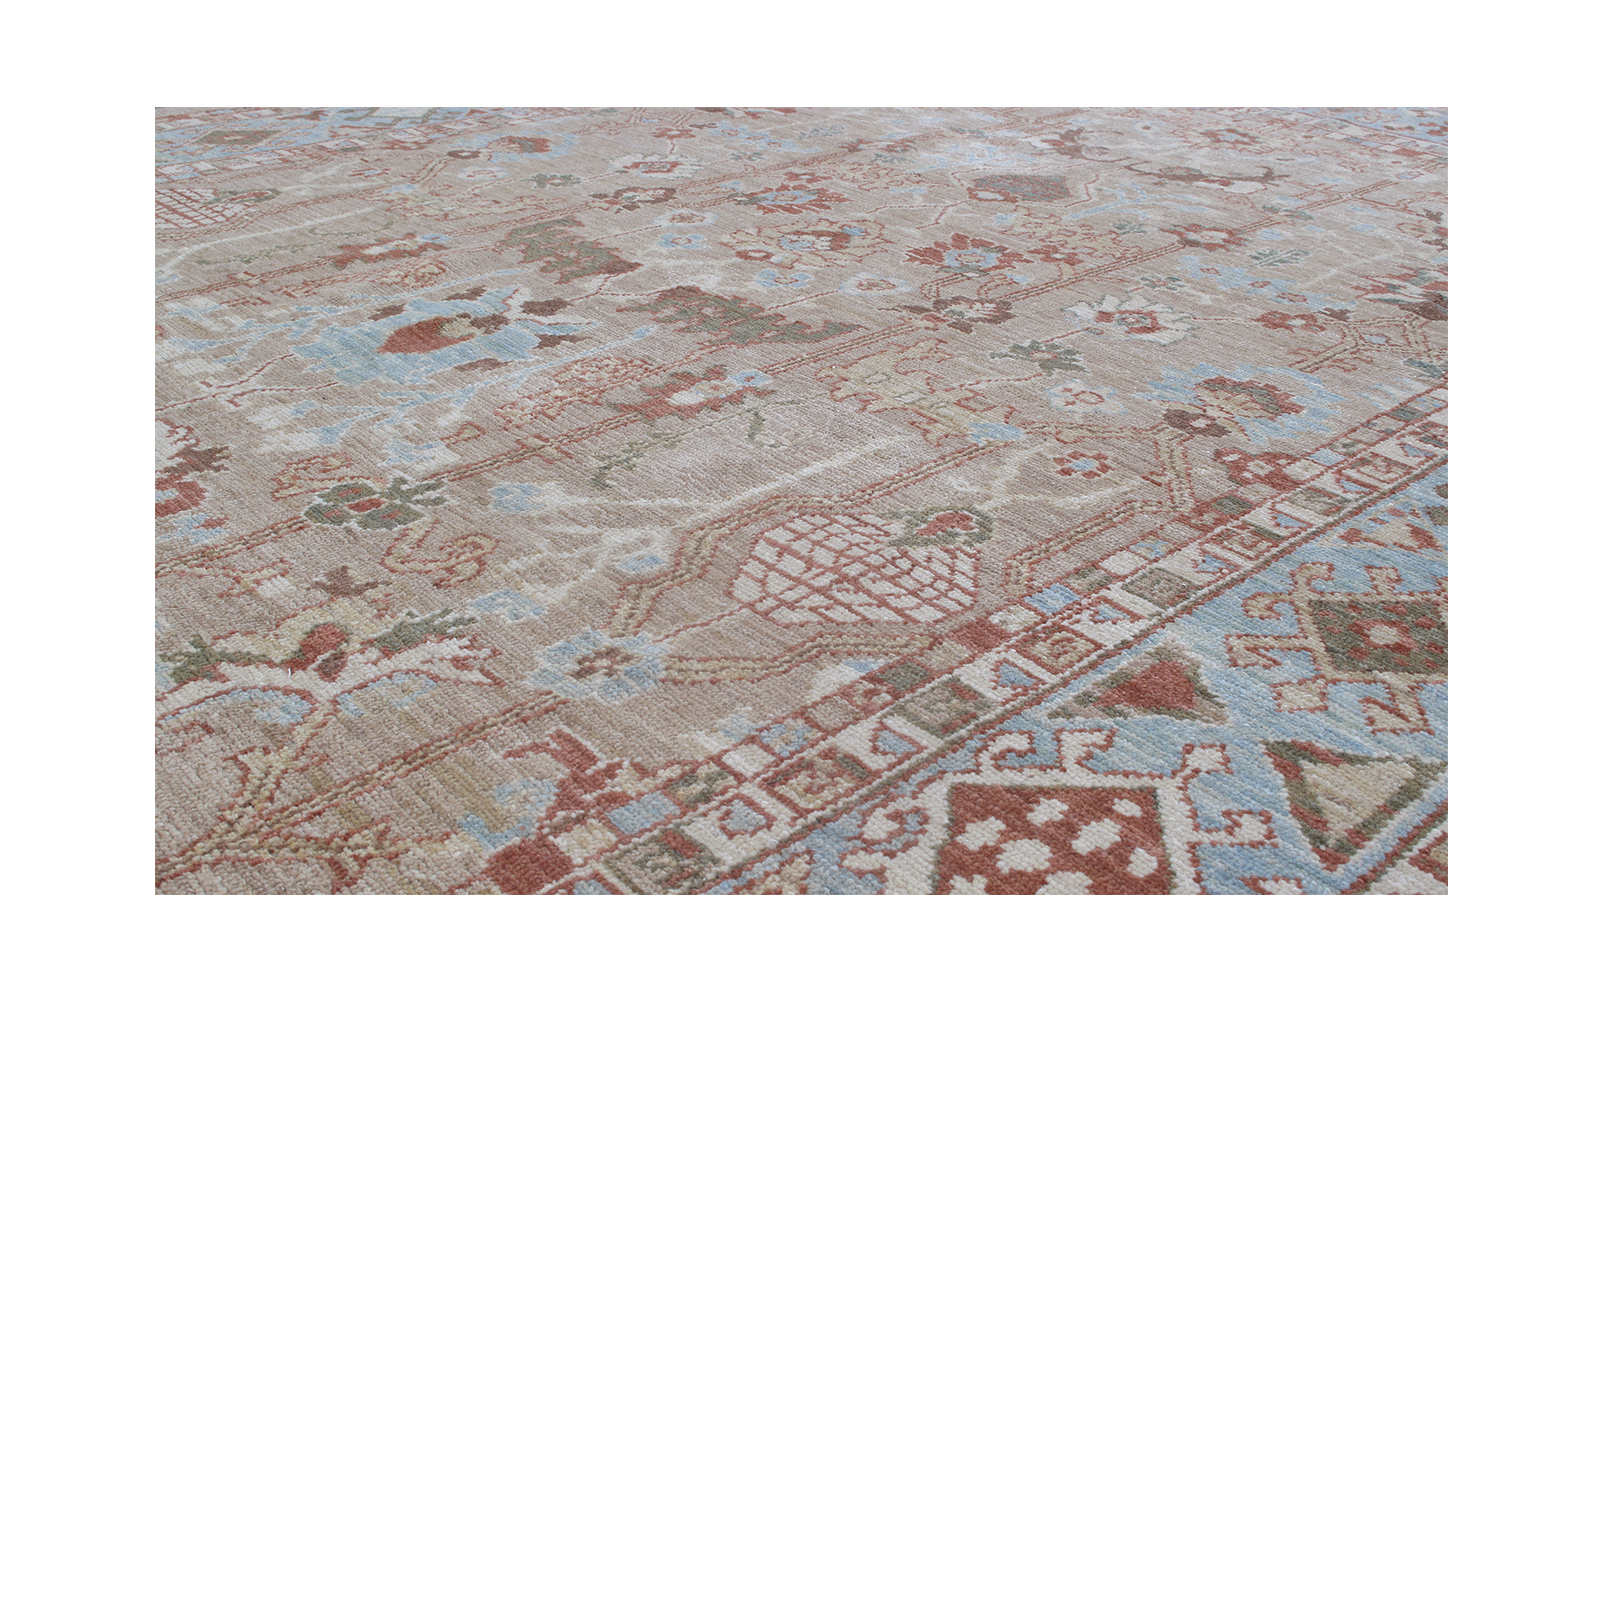 This Persian Bakshaish Rug is hand-carded Persian wool and natural dyes.